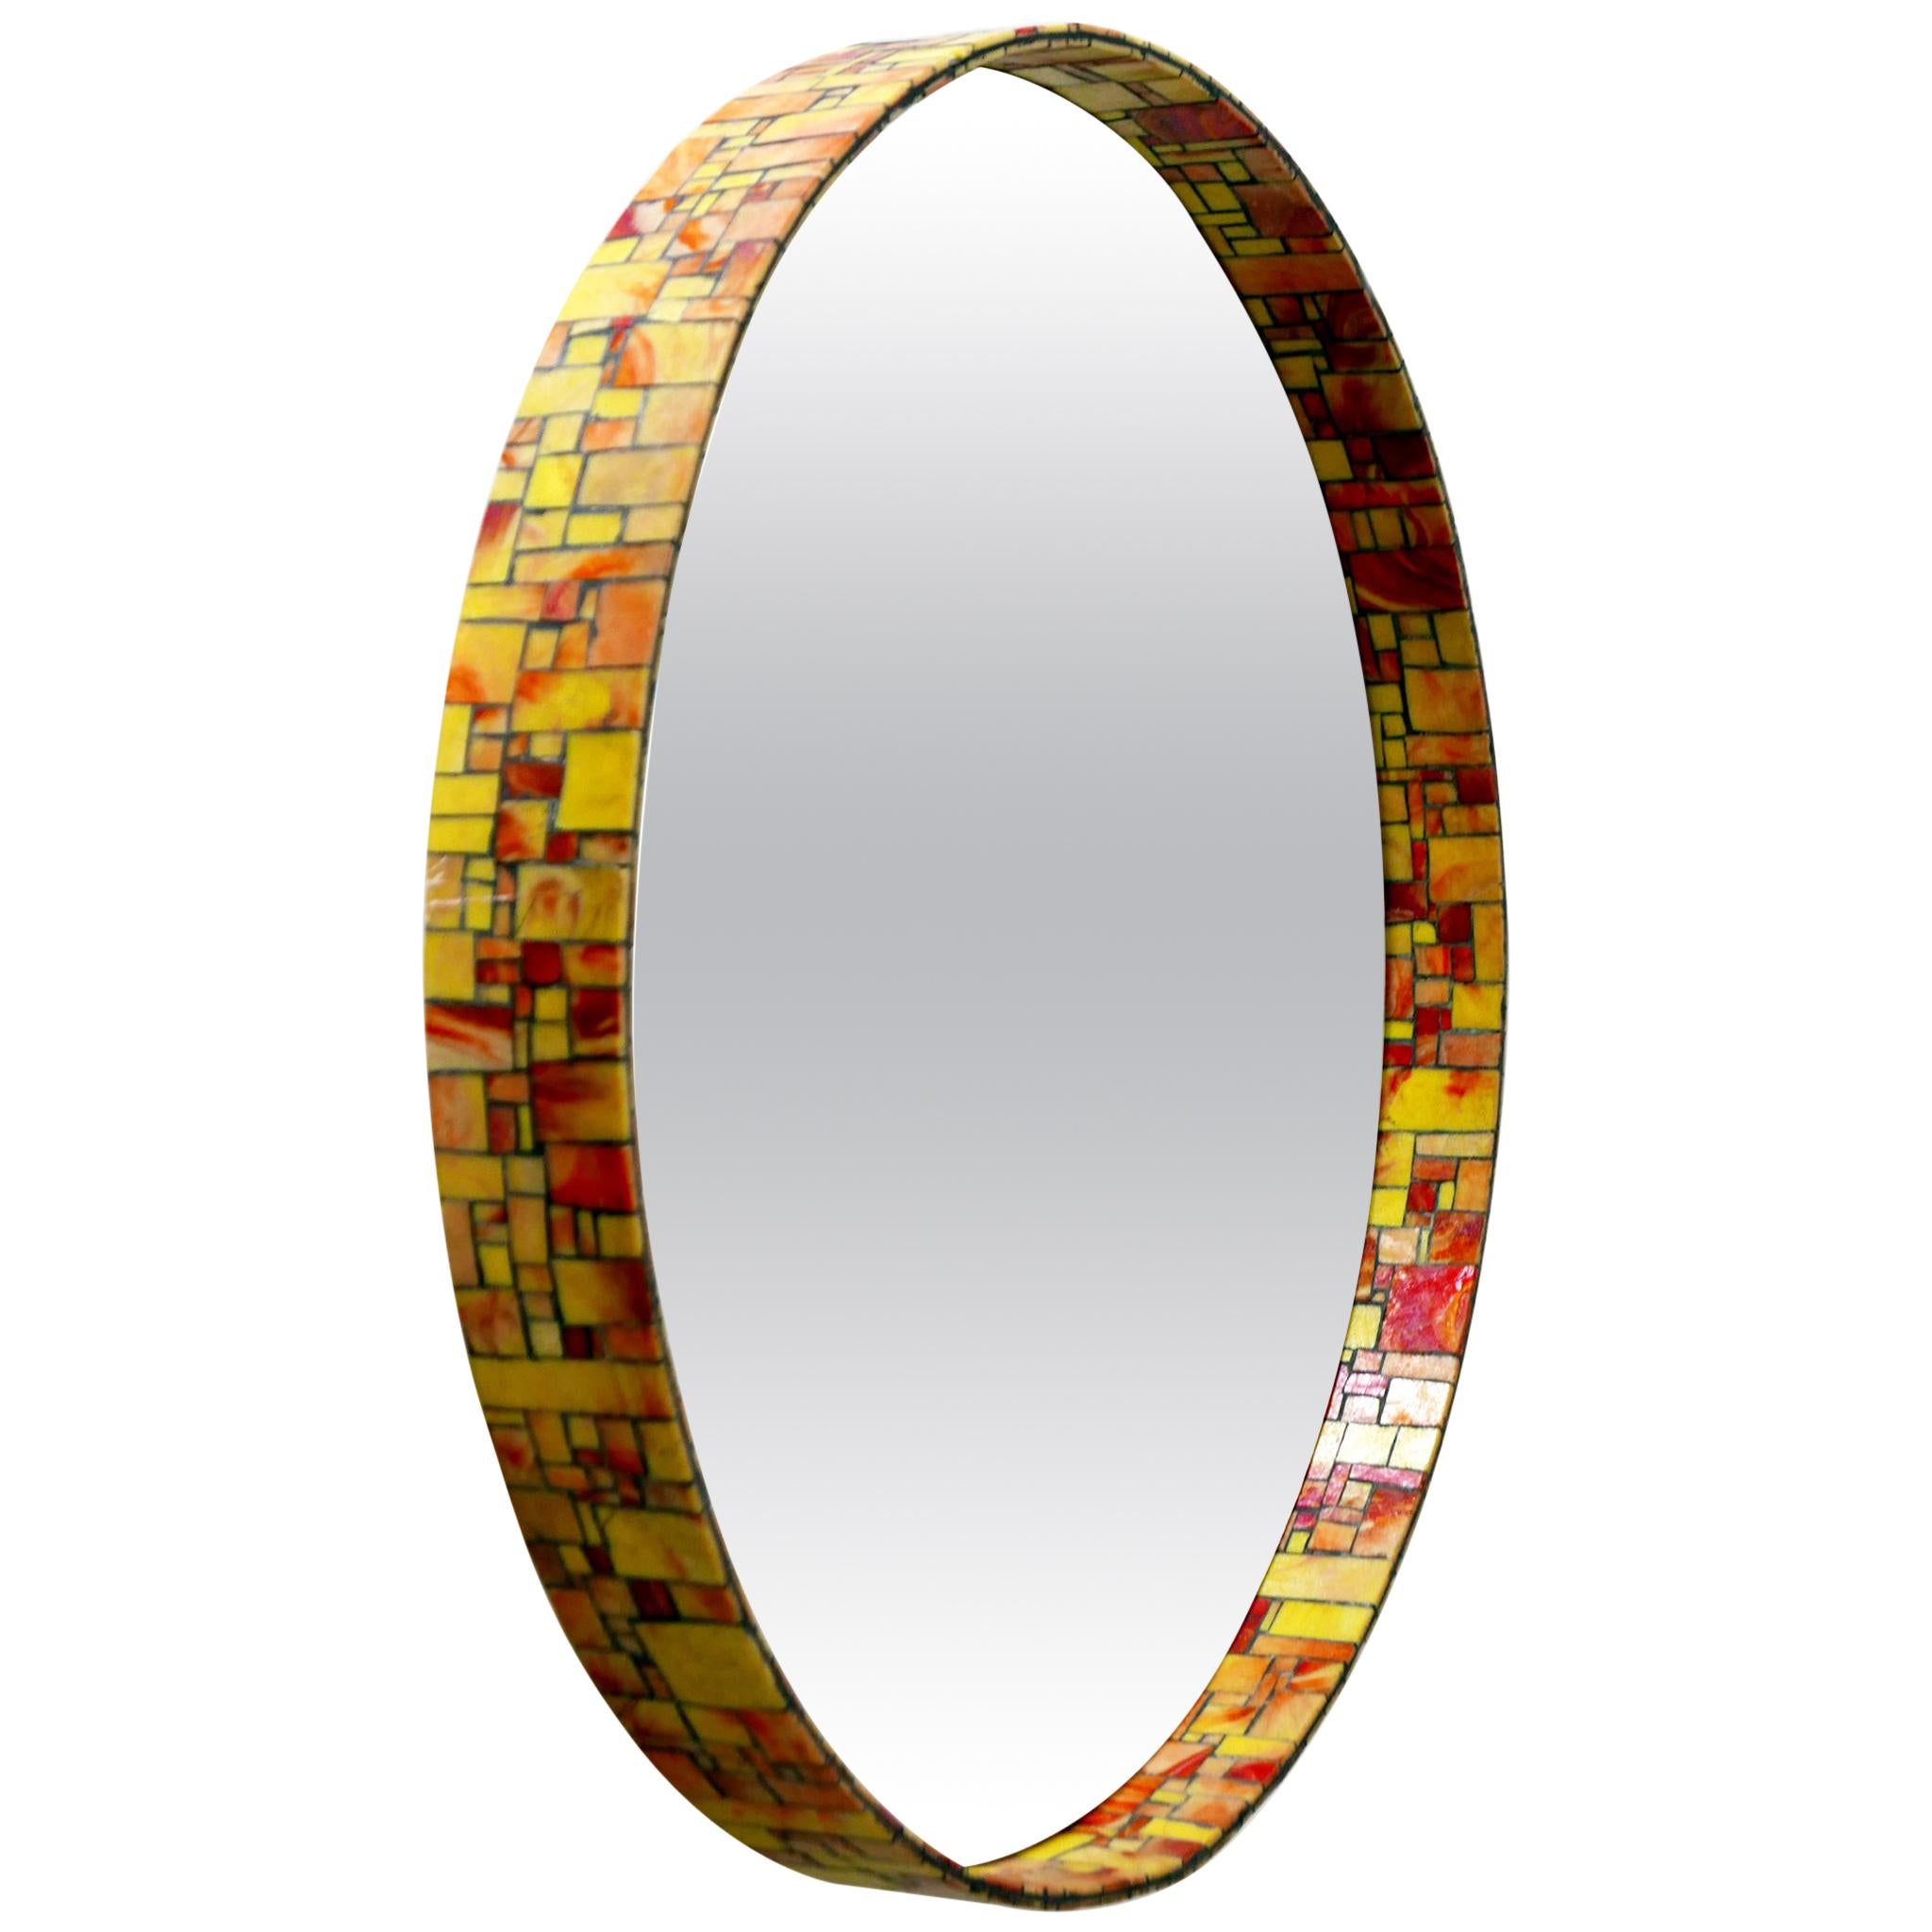 Exceptional Mid-Century Modern Mosaic Framed Circular Wall Mirror, Italy, 1960s For Sale